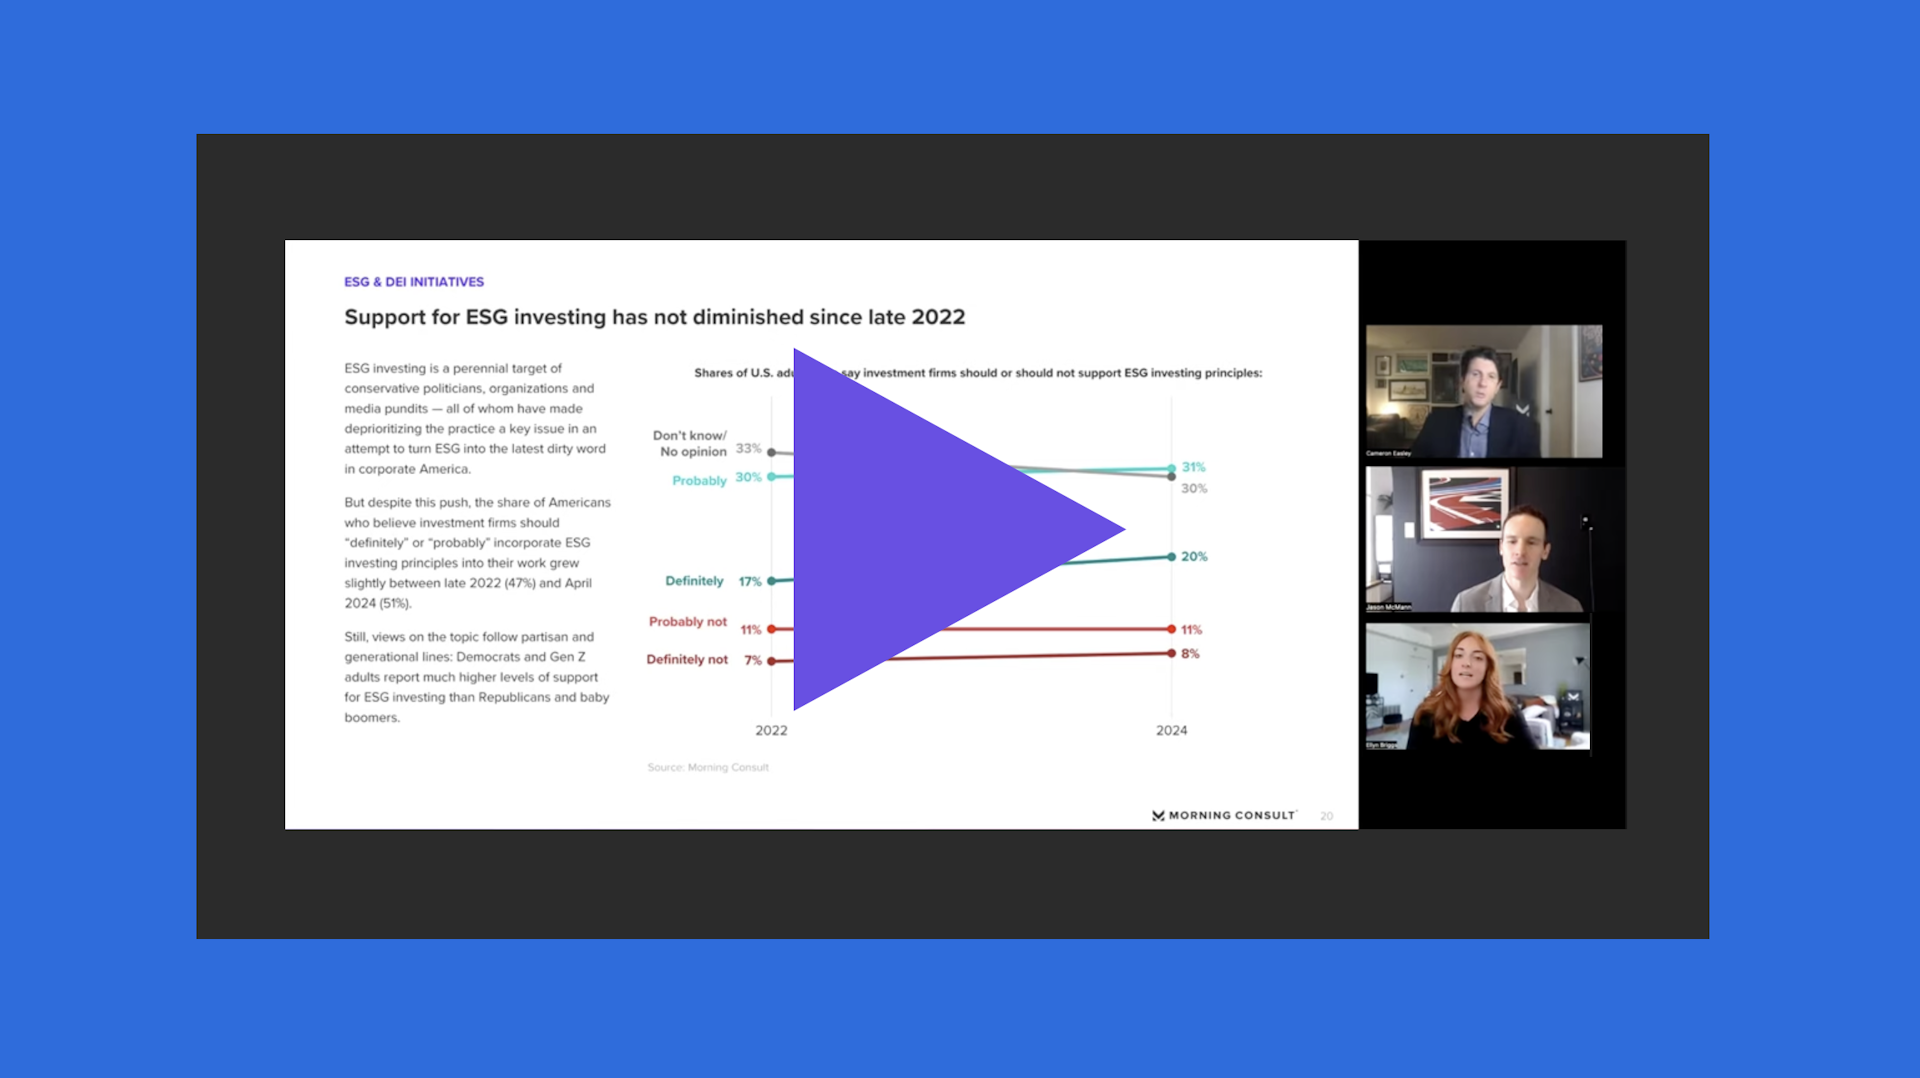 A zoom screenshot from a webinar, featuring three panelists discussing survey dayta.